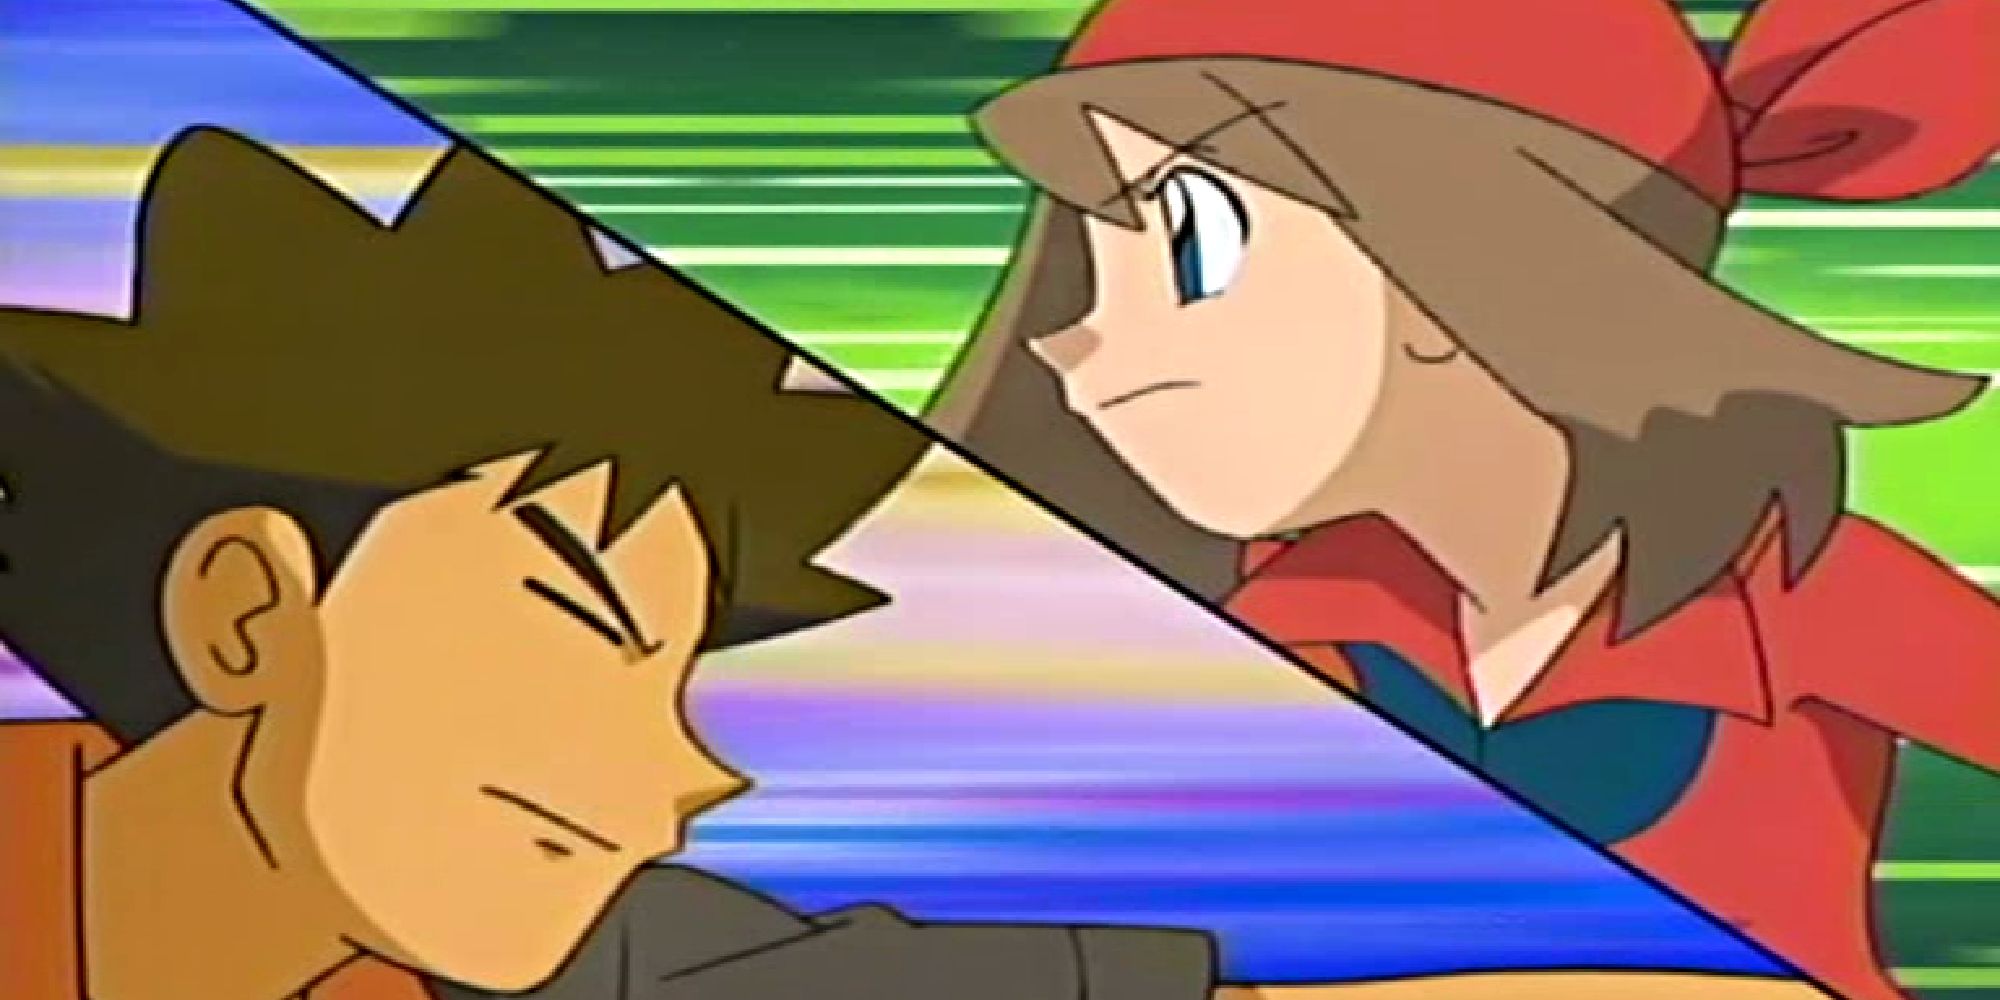 Brock and Misty facing each other against action lines